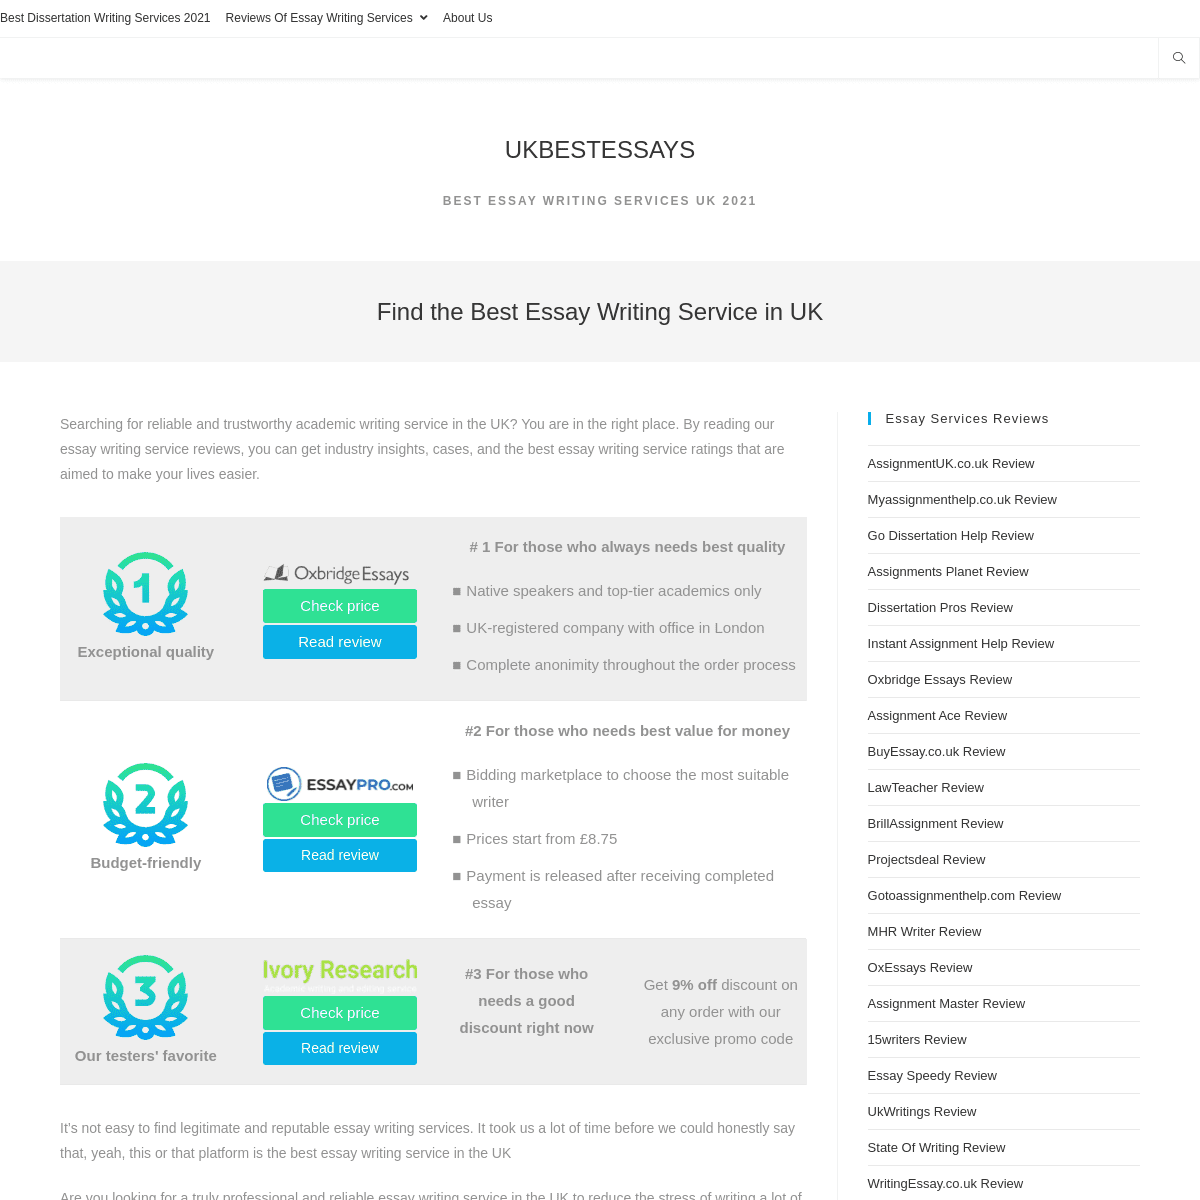 A complete backup of https://ukbestessays.org